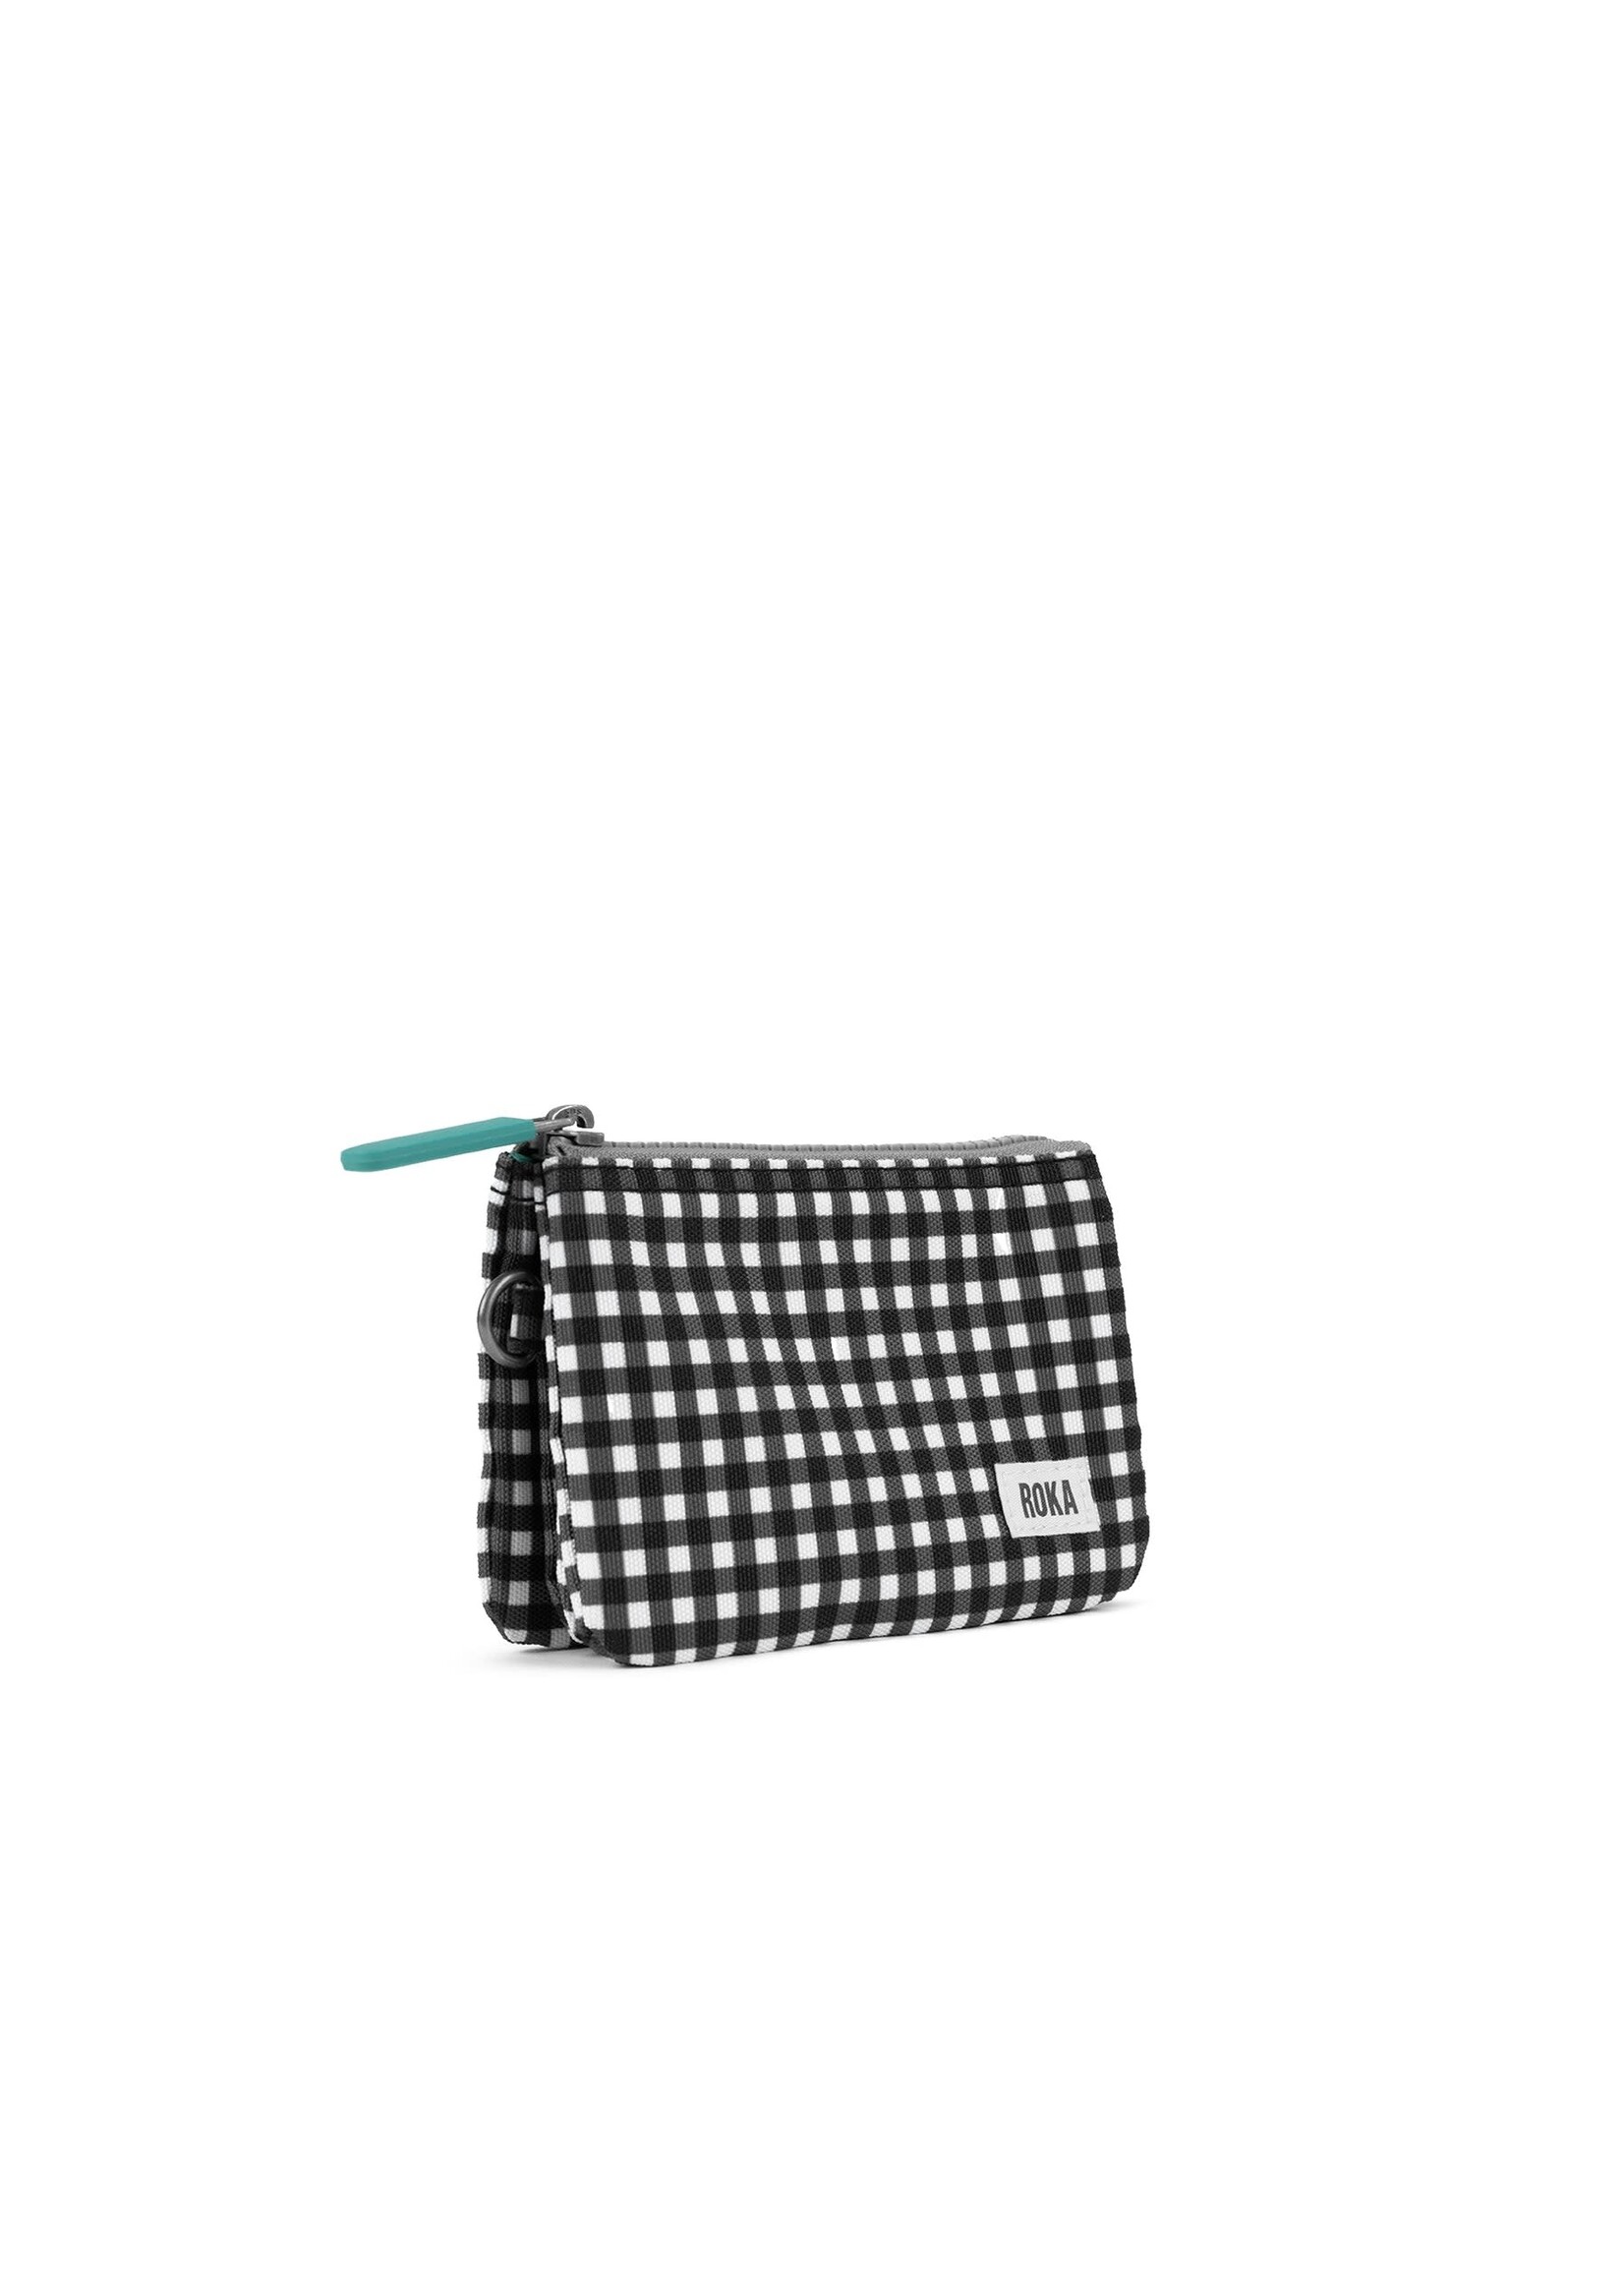 ROKA London Carnaby Small Sustainable Canvas Black & White Gingham